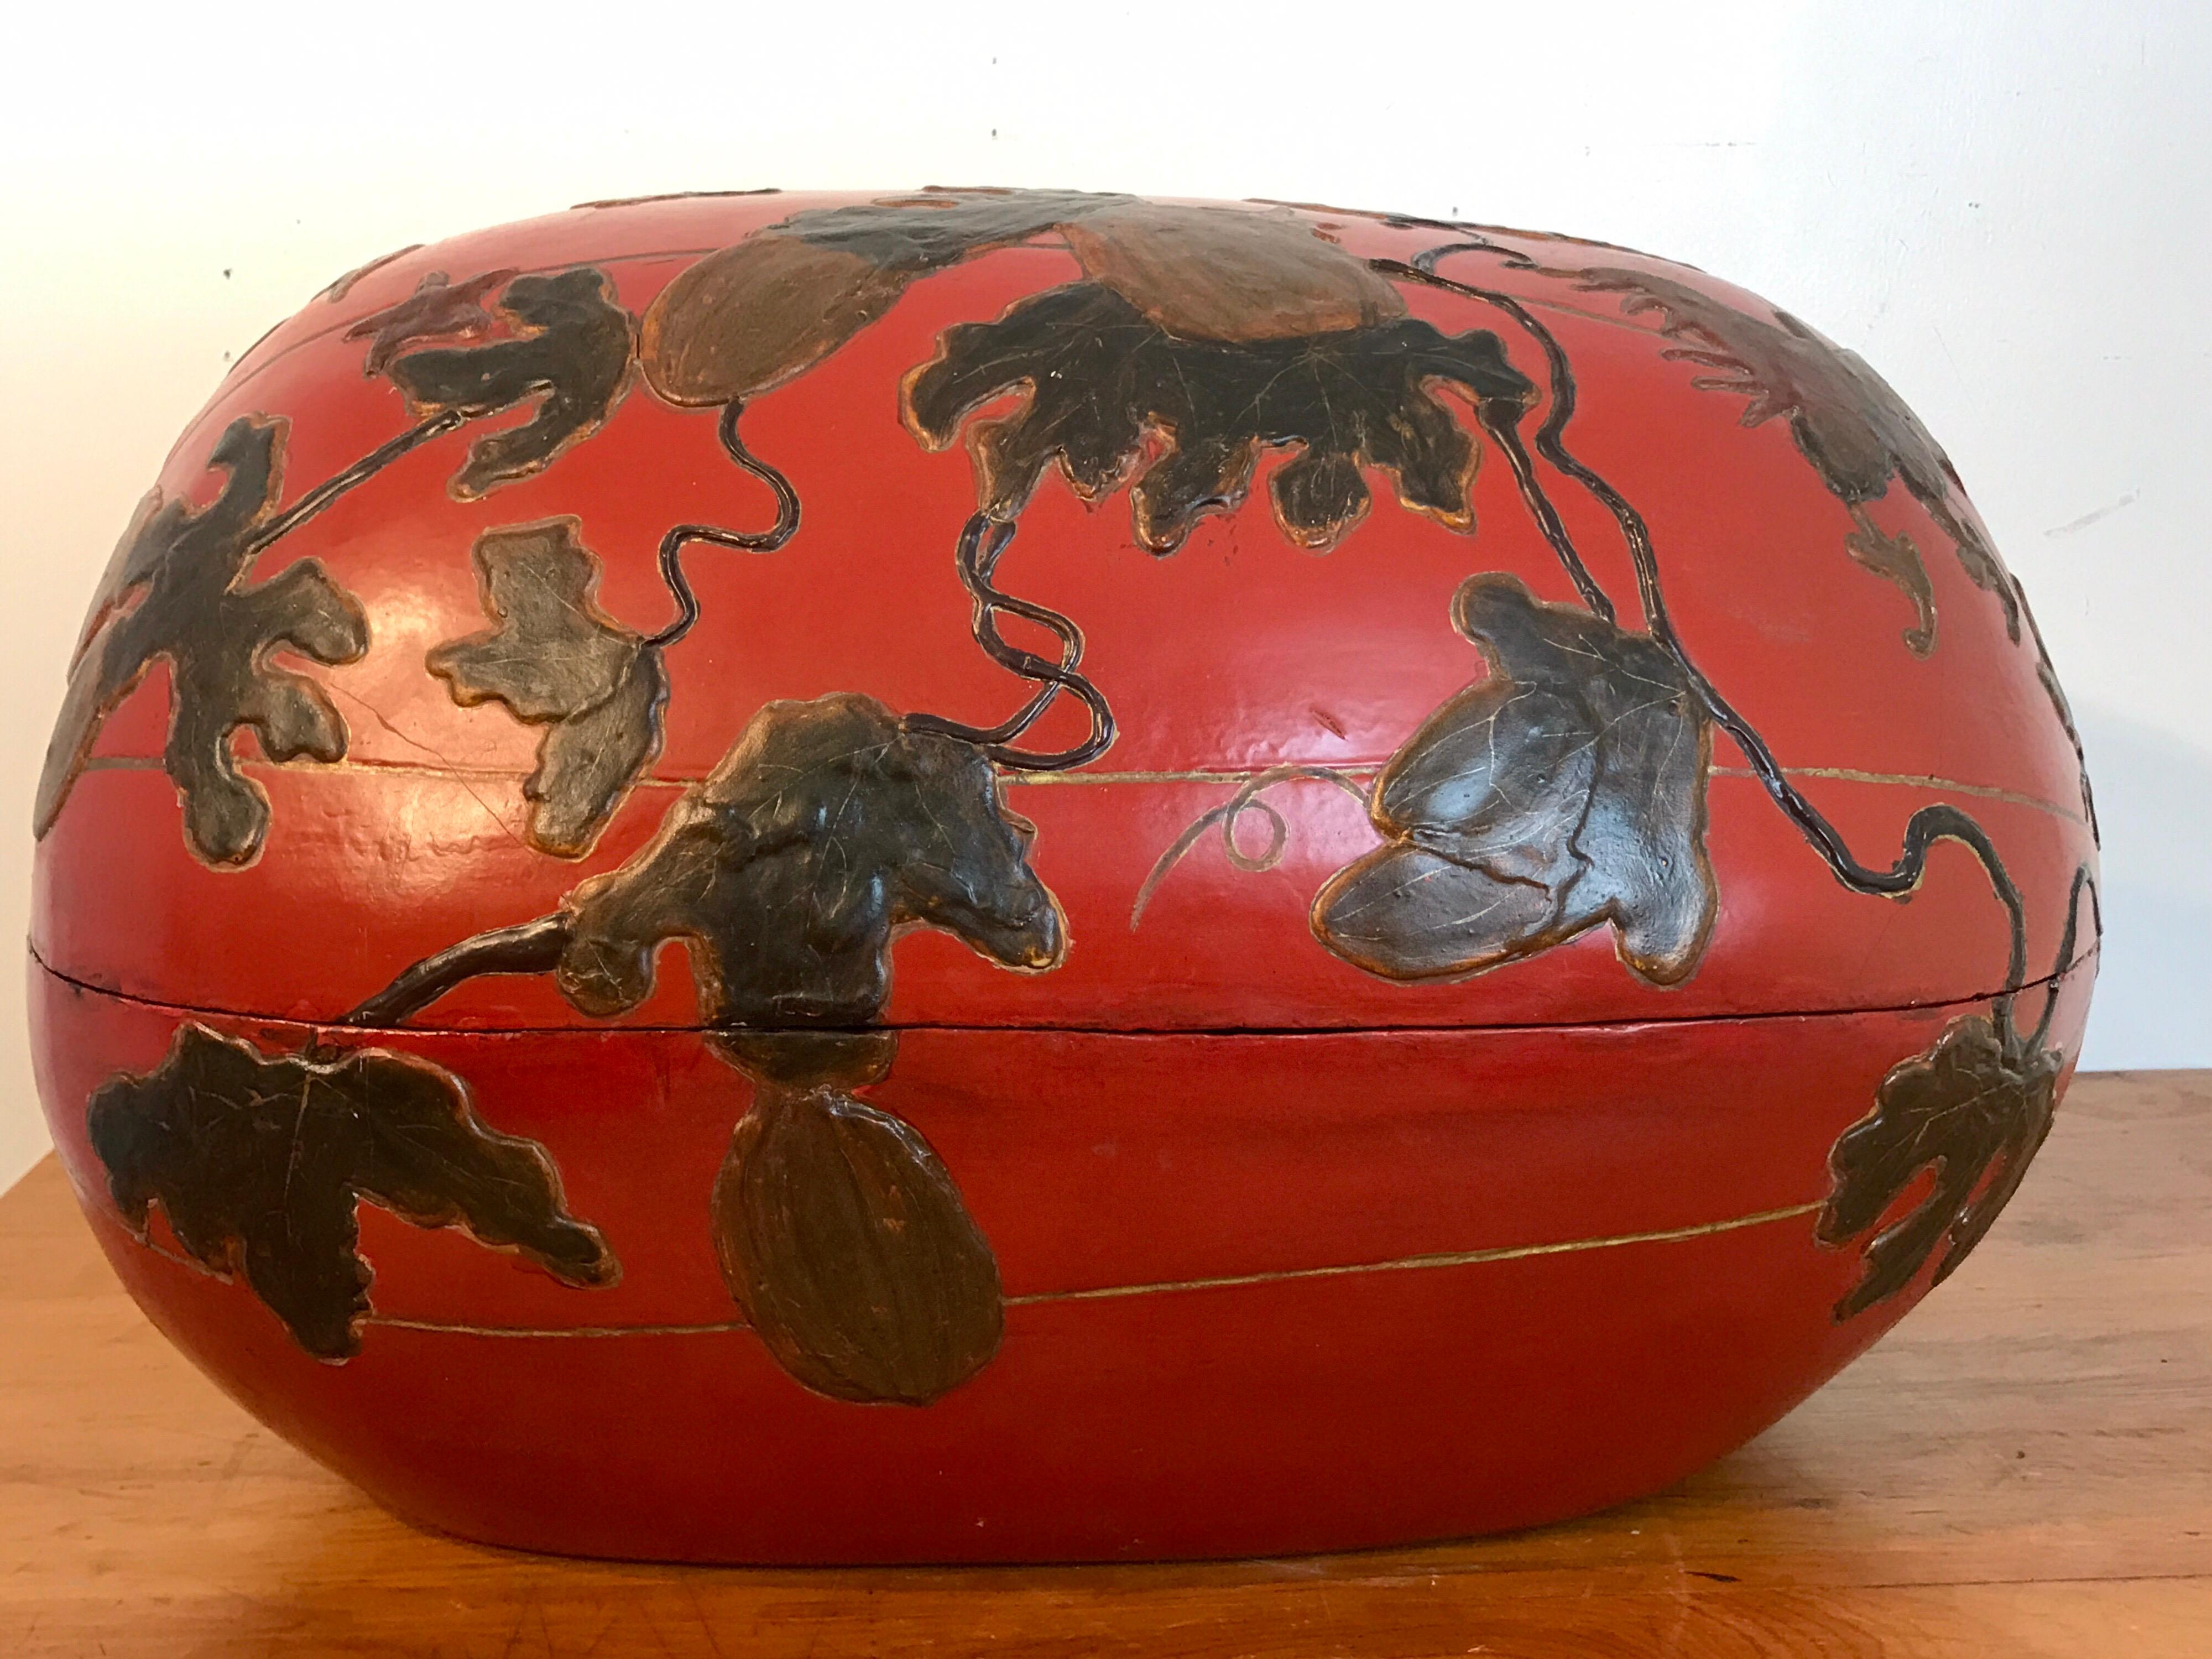 Huge Japanese red lacquerware gourd motif box, decorated in relief with Japanese gourds suspended from leafy branches and scrolling vines.